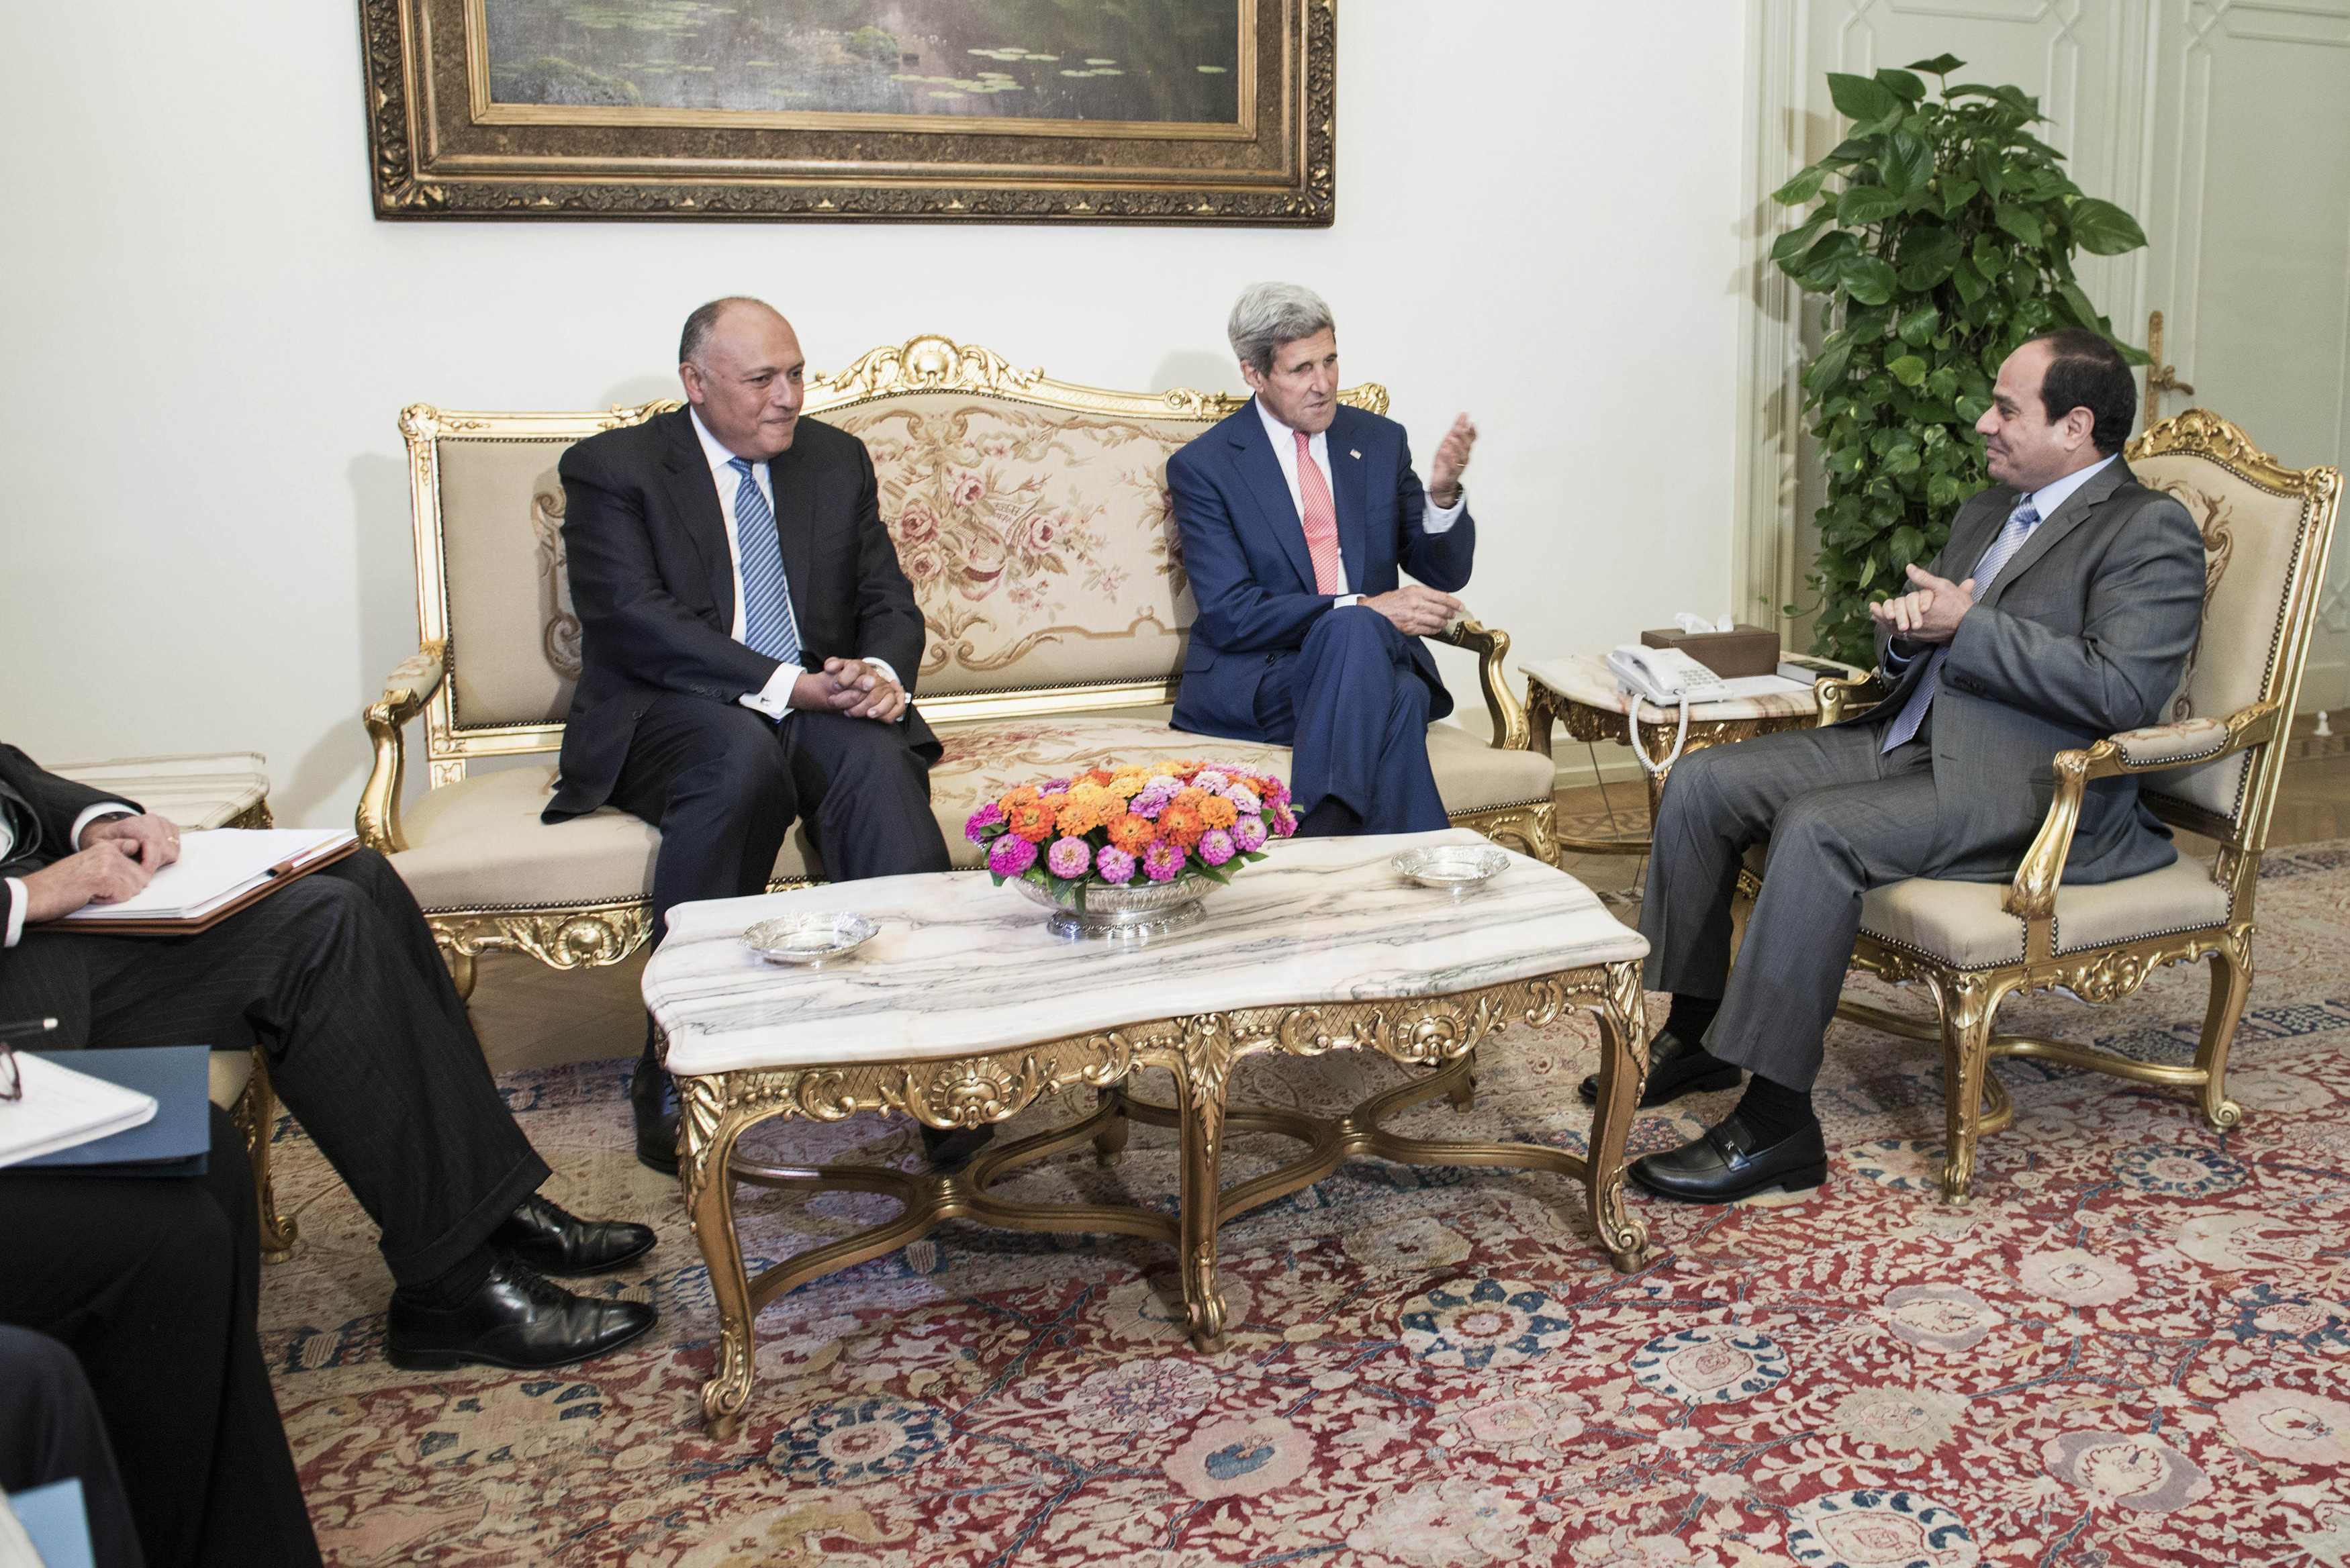 UPDATE - Kerry mobilises support in Cairo for coalition against Islamic State